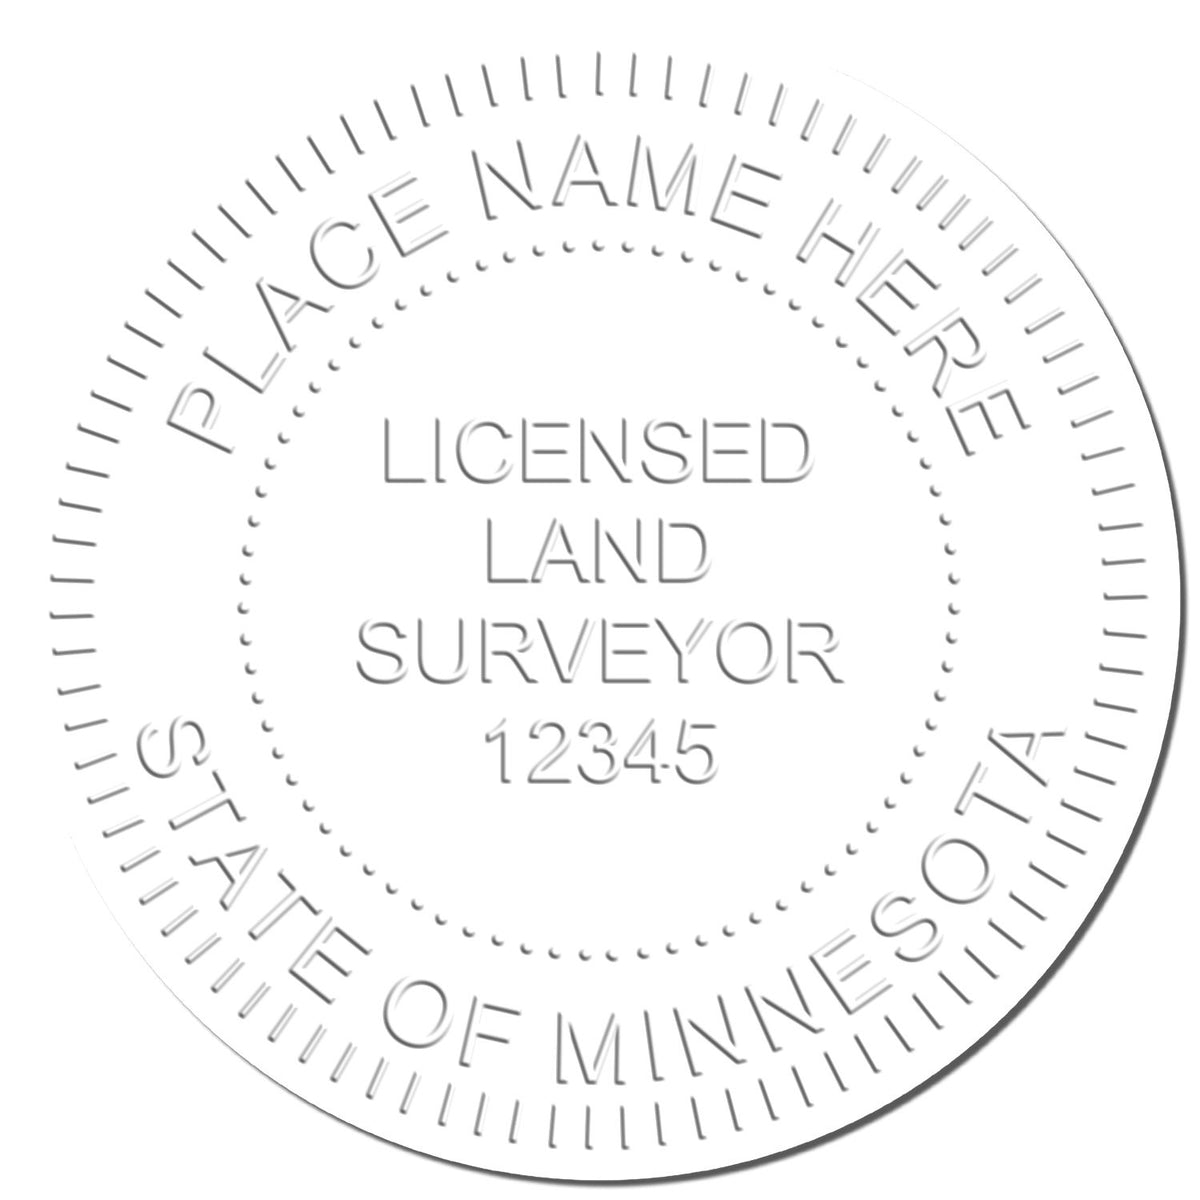 This paper is stamped with a sample imprint of the Heavy Duty Cast Iron Minnesota Land Surveyor Seal Embosser, signifying its quality and reliability.